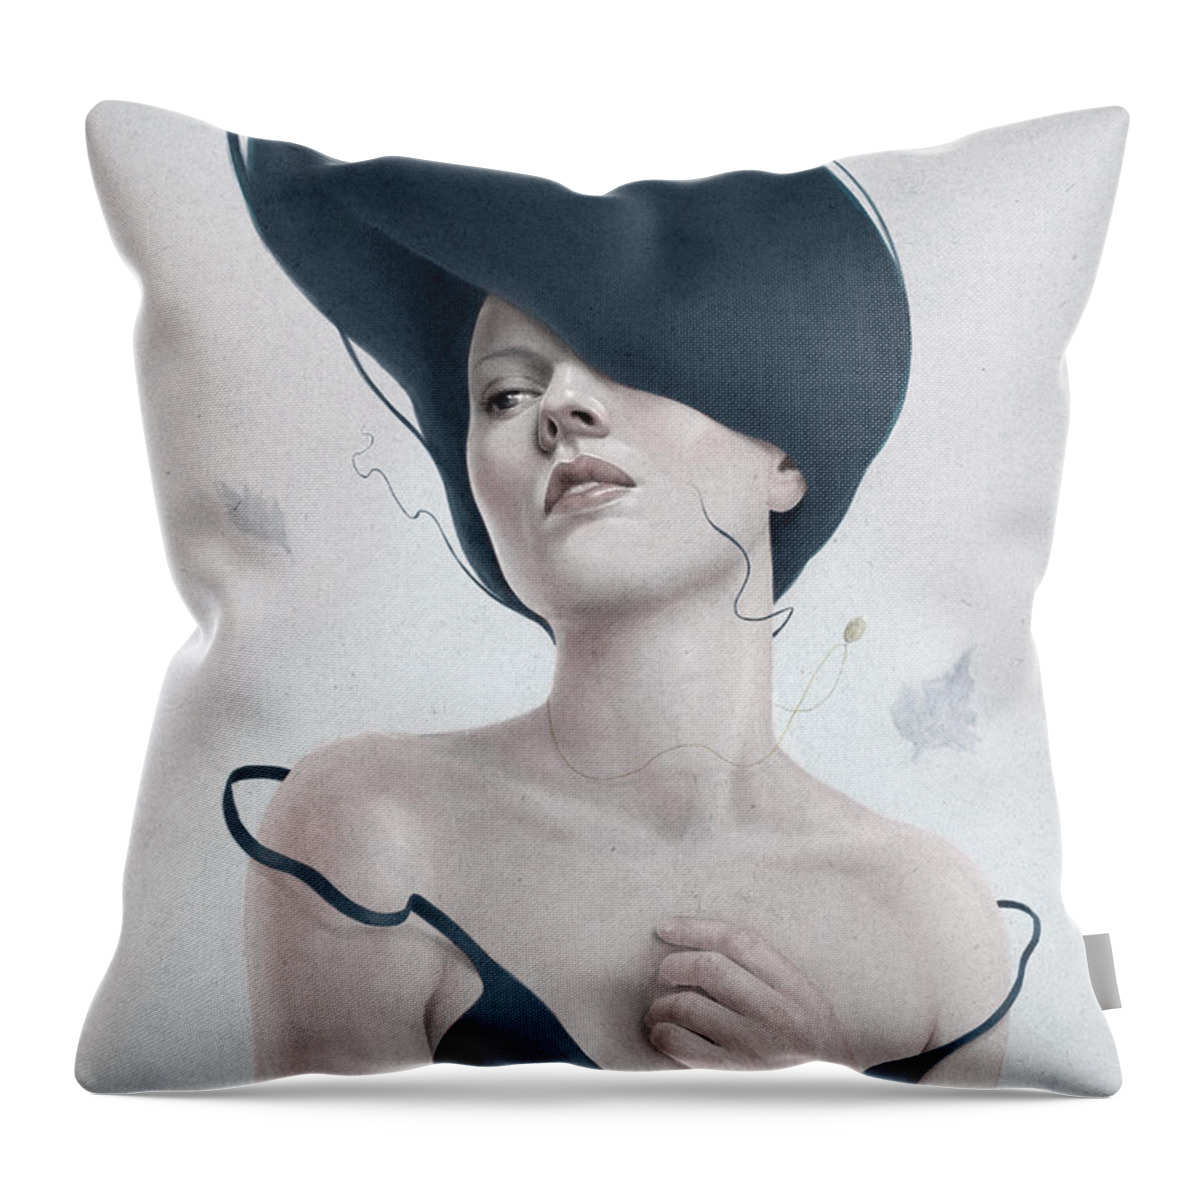 Woman Throw Pillow featuring the digital art Ascension by Diego Fernandez